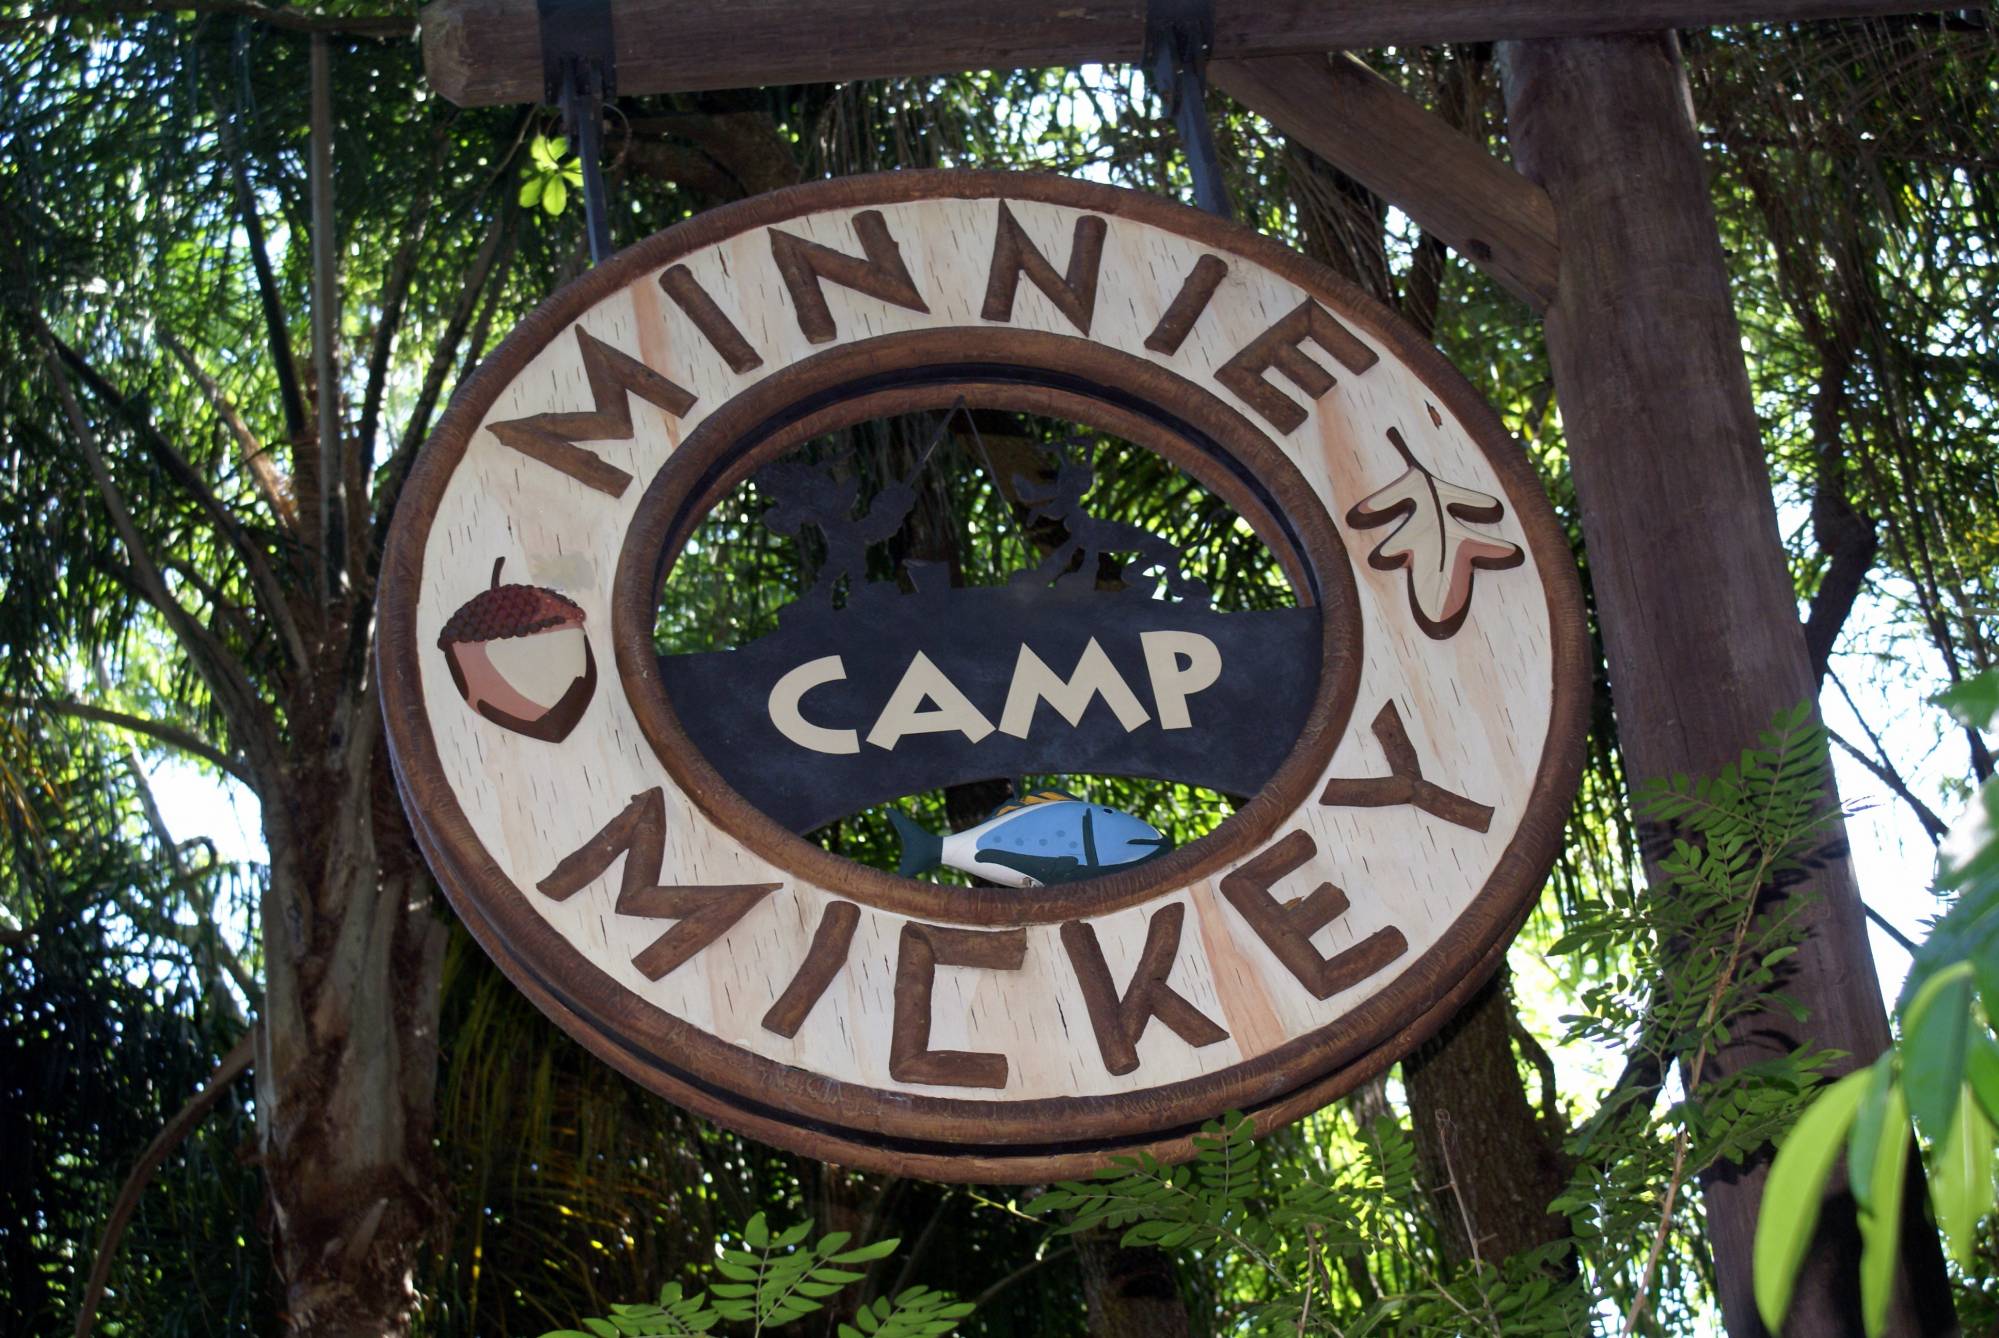 Animal Kingdom - Sign for Camp Minnie and Mickey